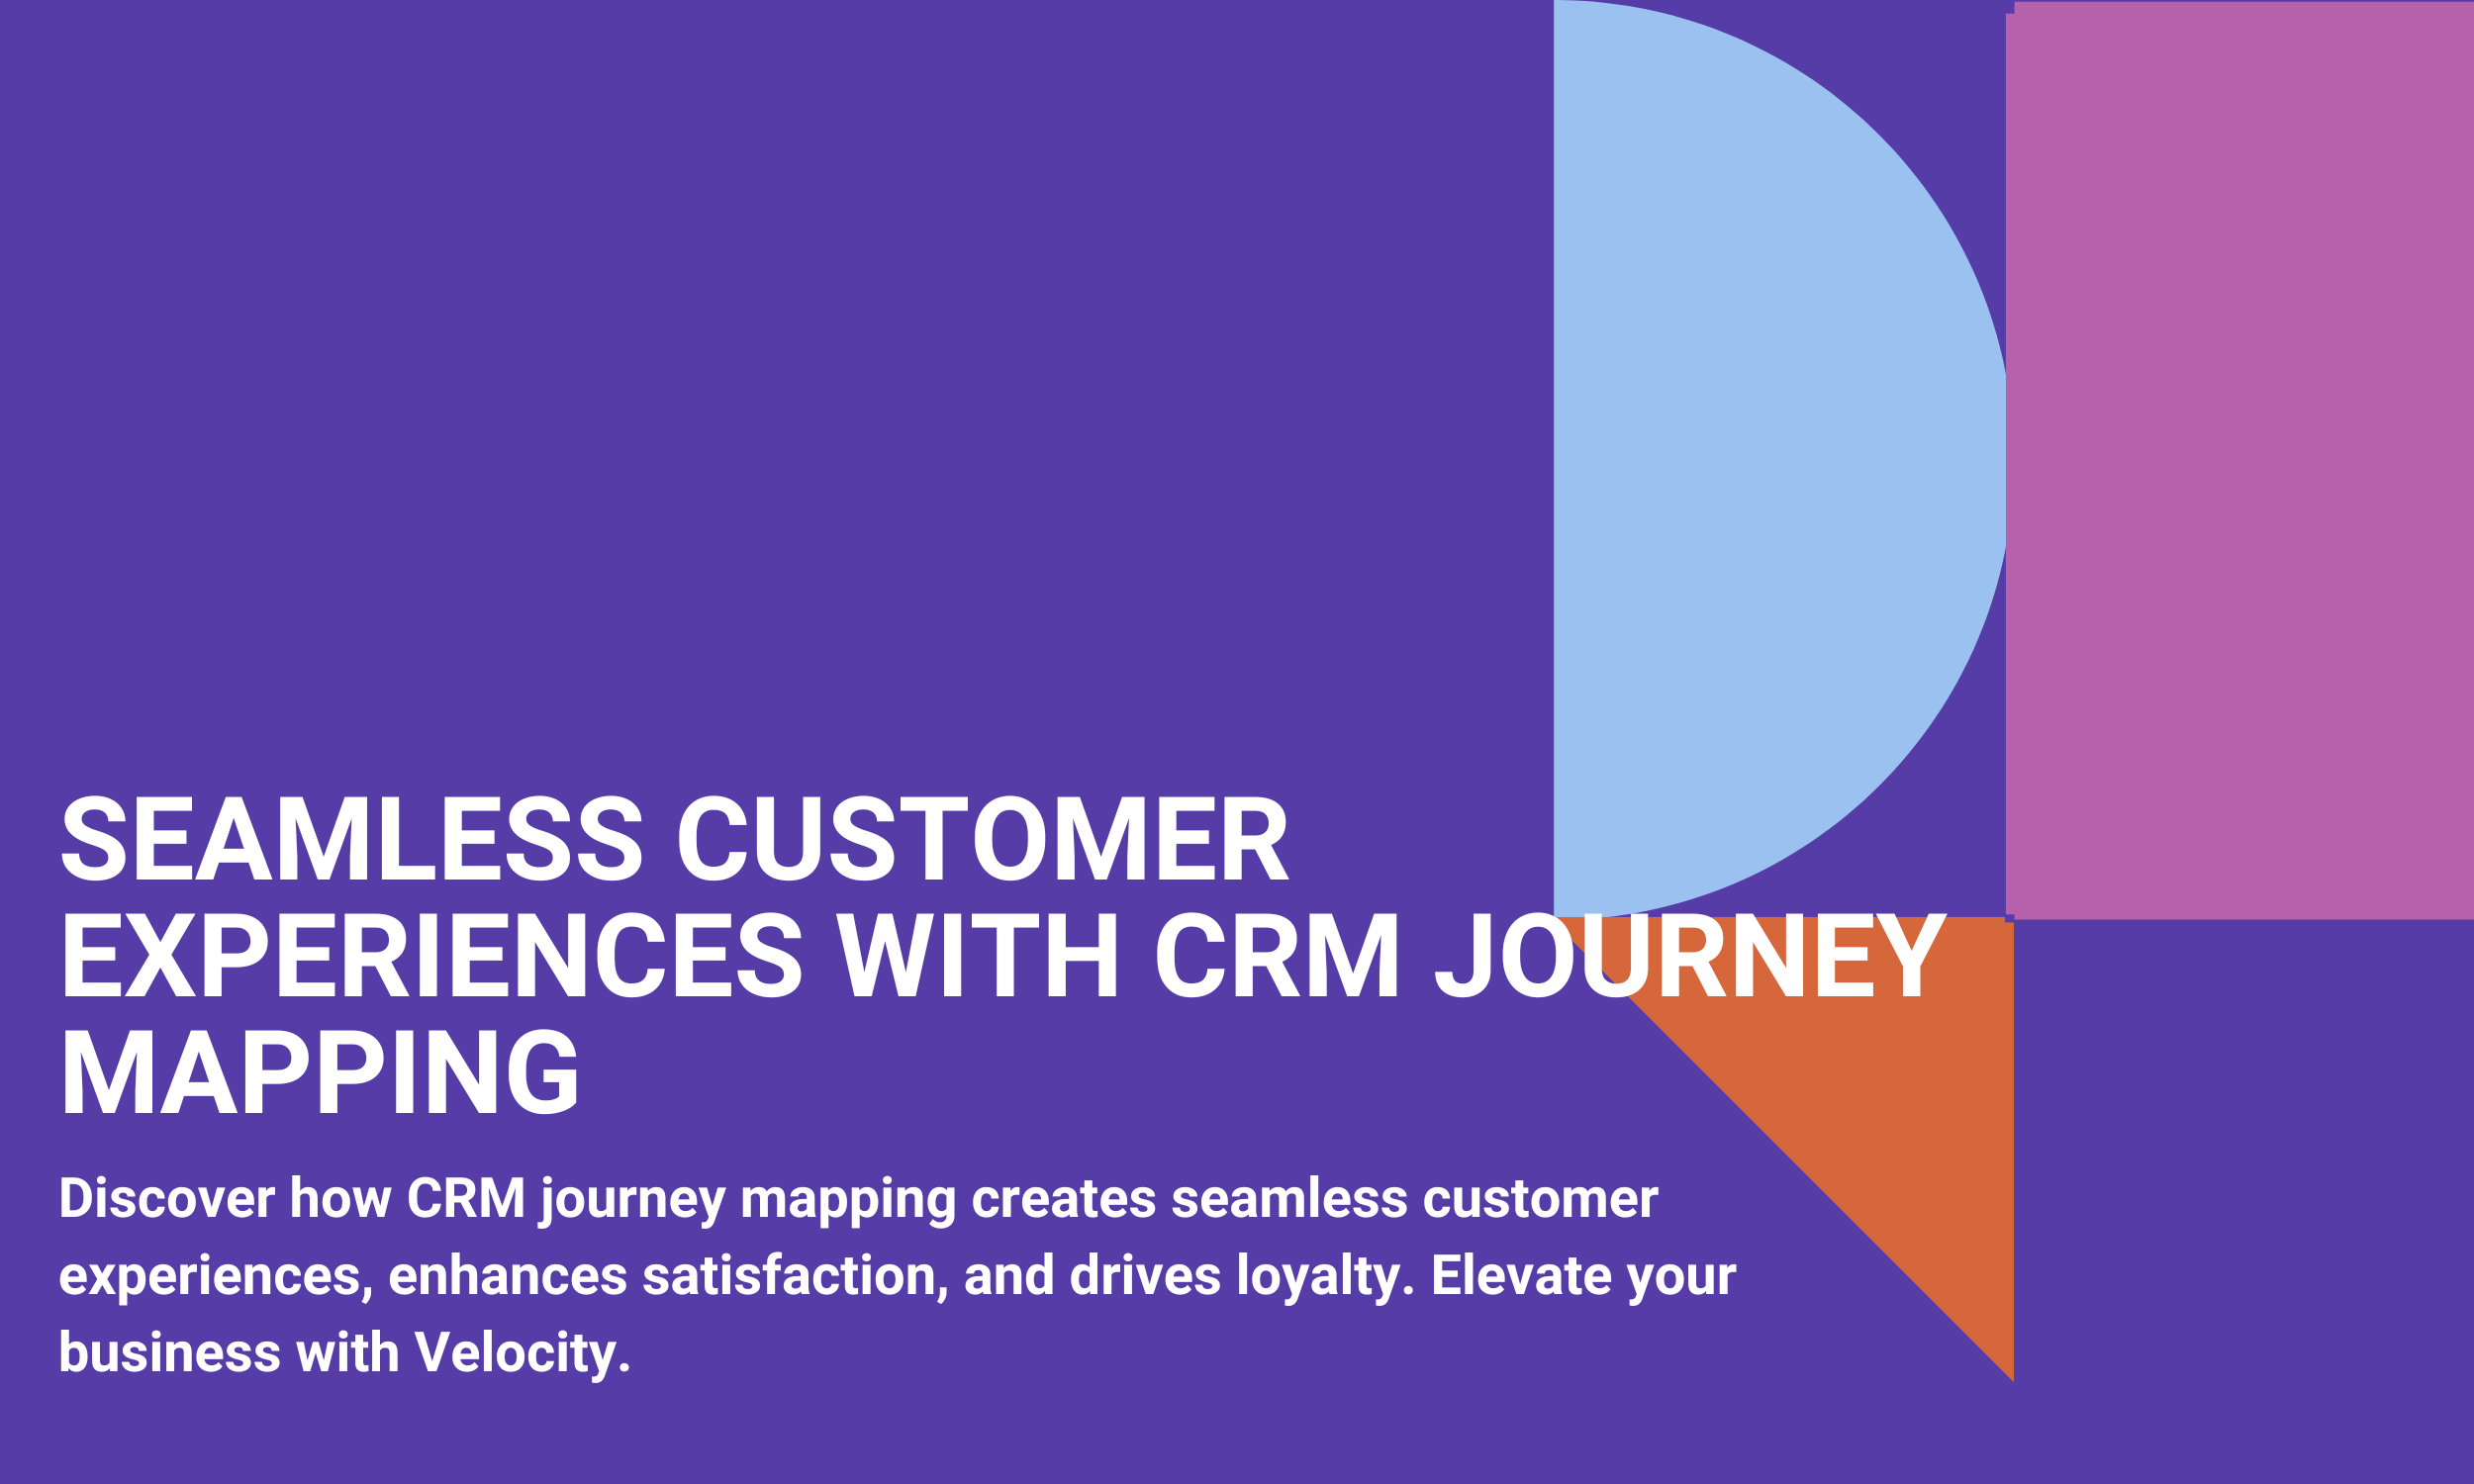 Seamless Customer Experiences with CRM Journey Mapping